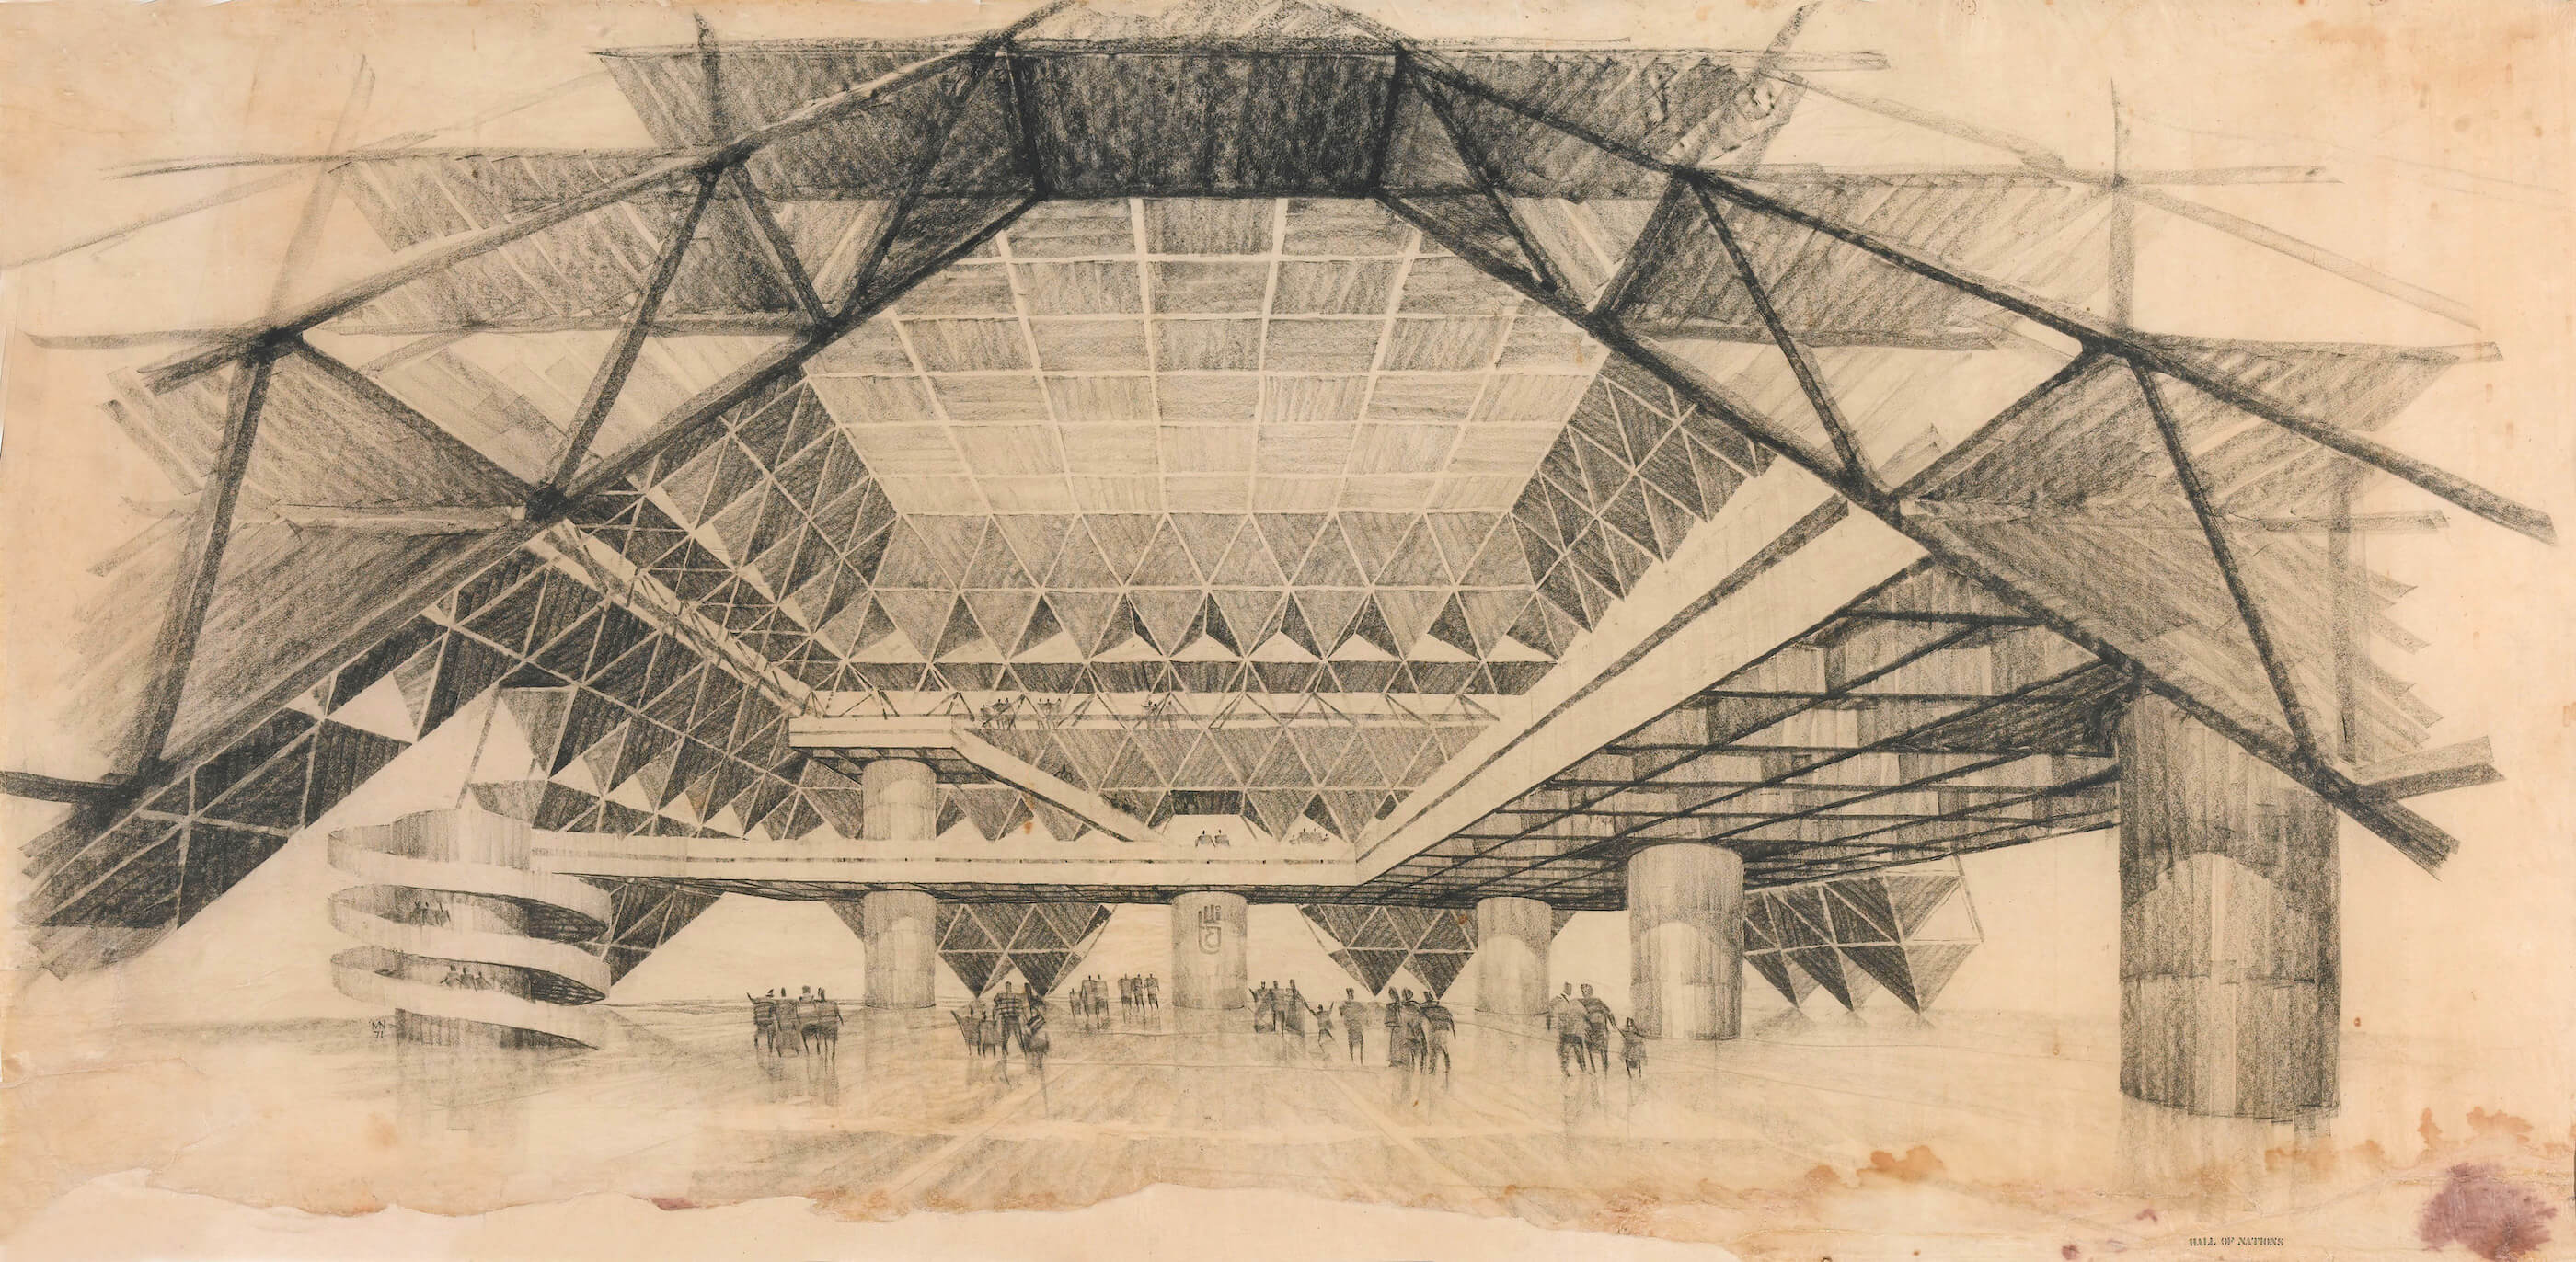 architectural drawling of a civic building in new delhi, india